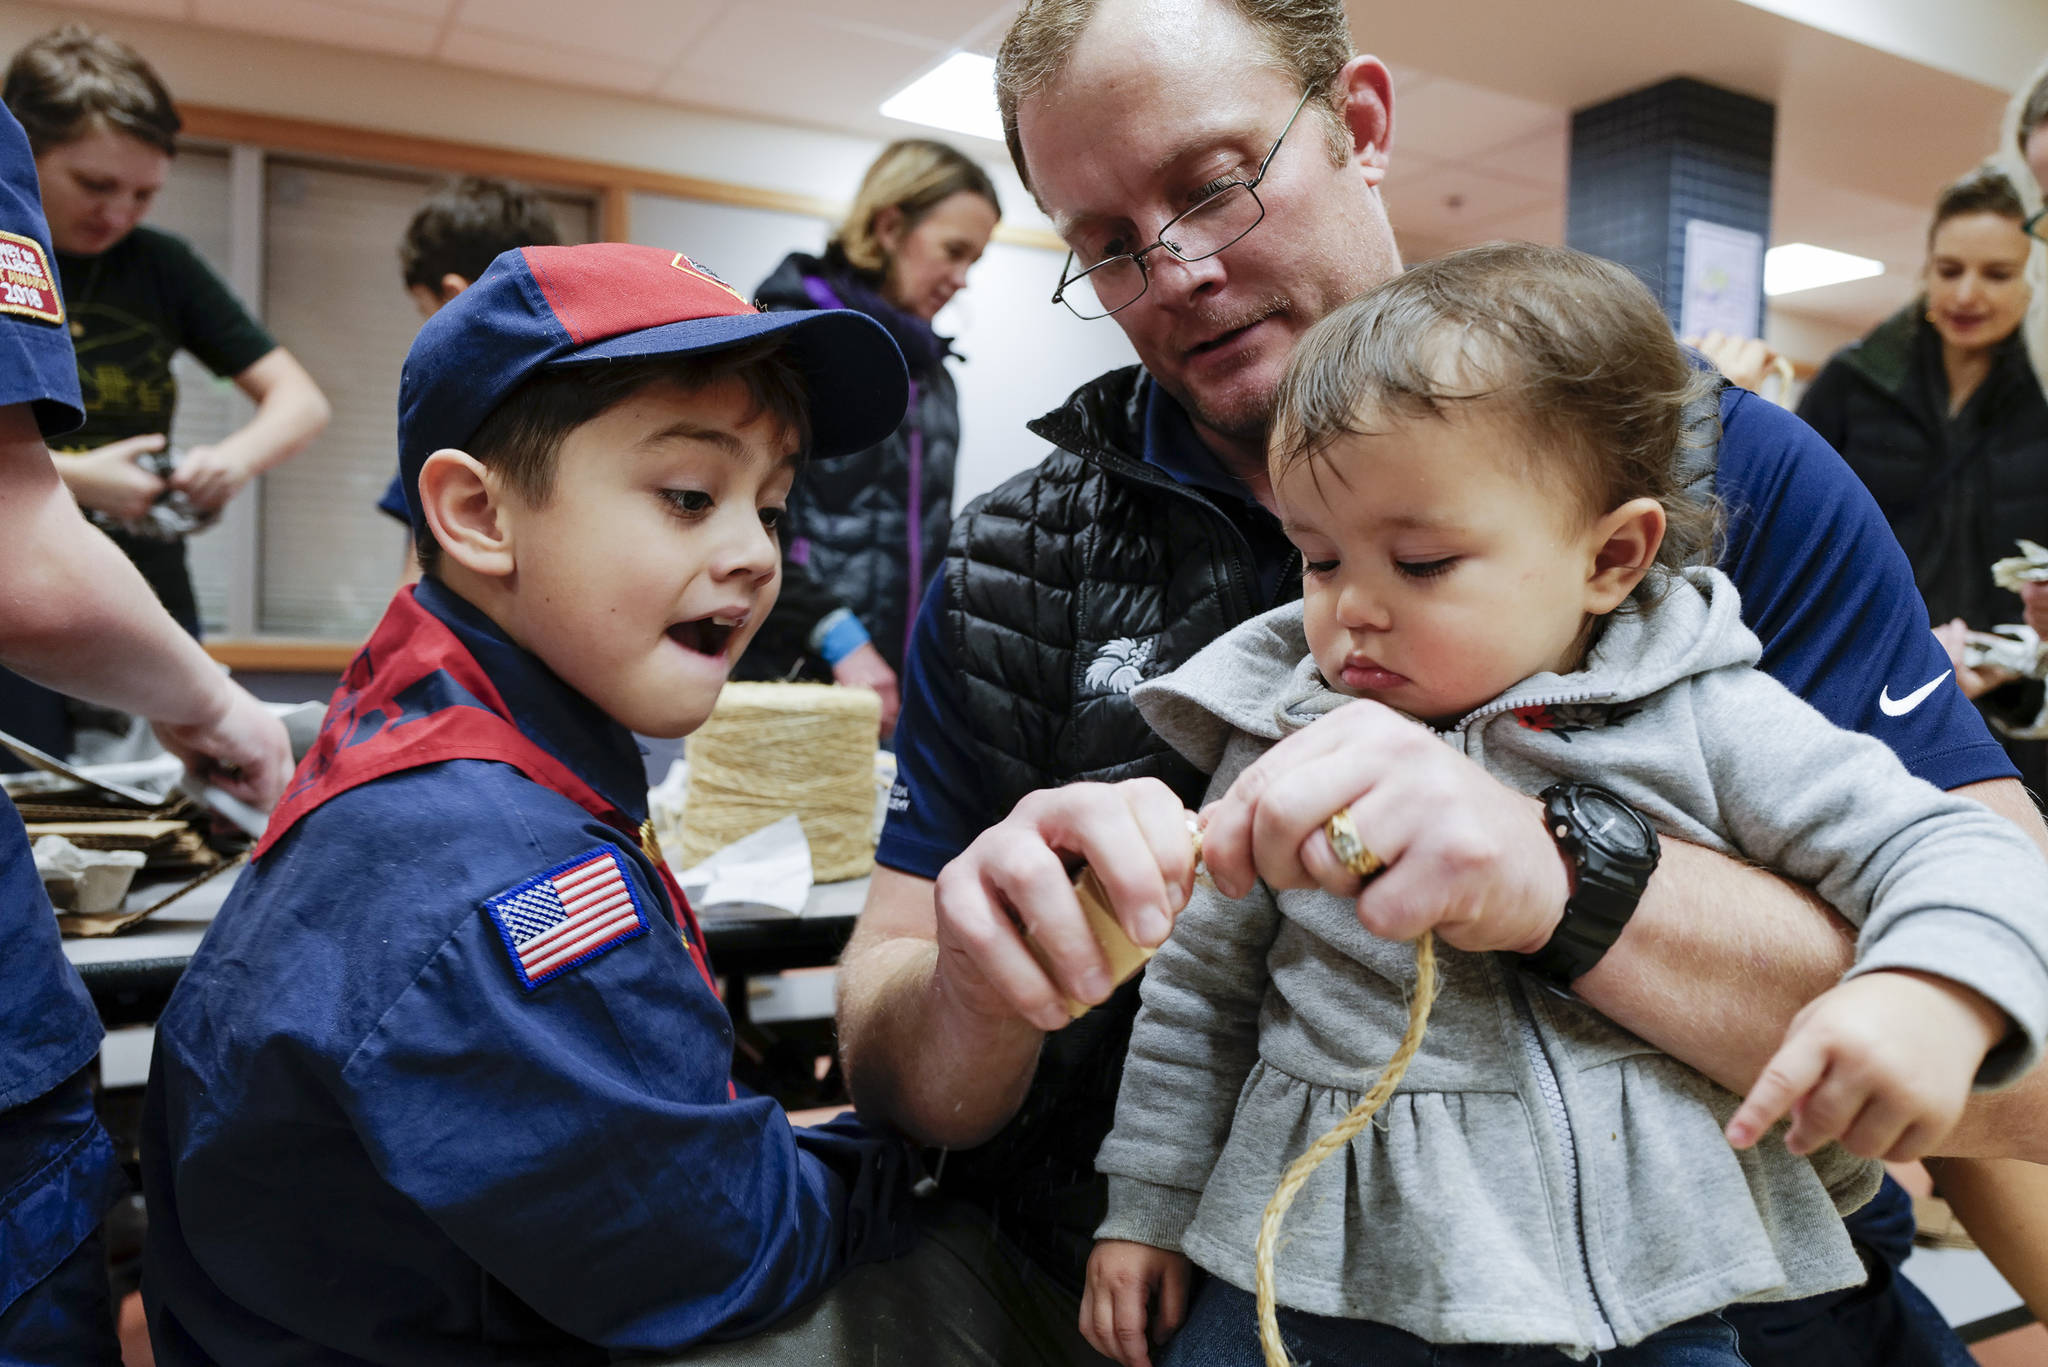 Michael LaRue helps his son, Joseph, 8, left, with his enrichment toys for birds while holding his 15-month-old daughter, Mylene, during a Cub Scout Pack 10 meeting at Harborview Elementary School on Friday, Nov. 22, 2019. About 25 cub scouts constructed the toys as a service project for the Juneau Raptor Center. (Michael Penn | Juneau Empire)